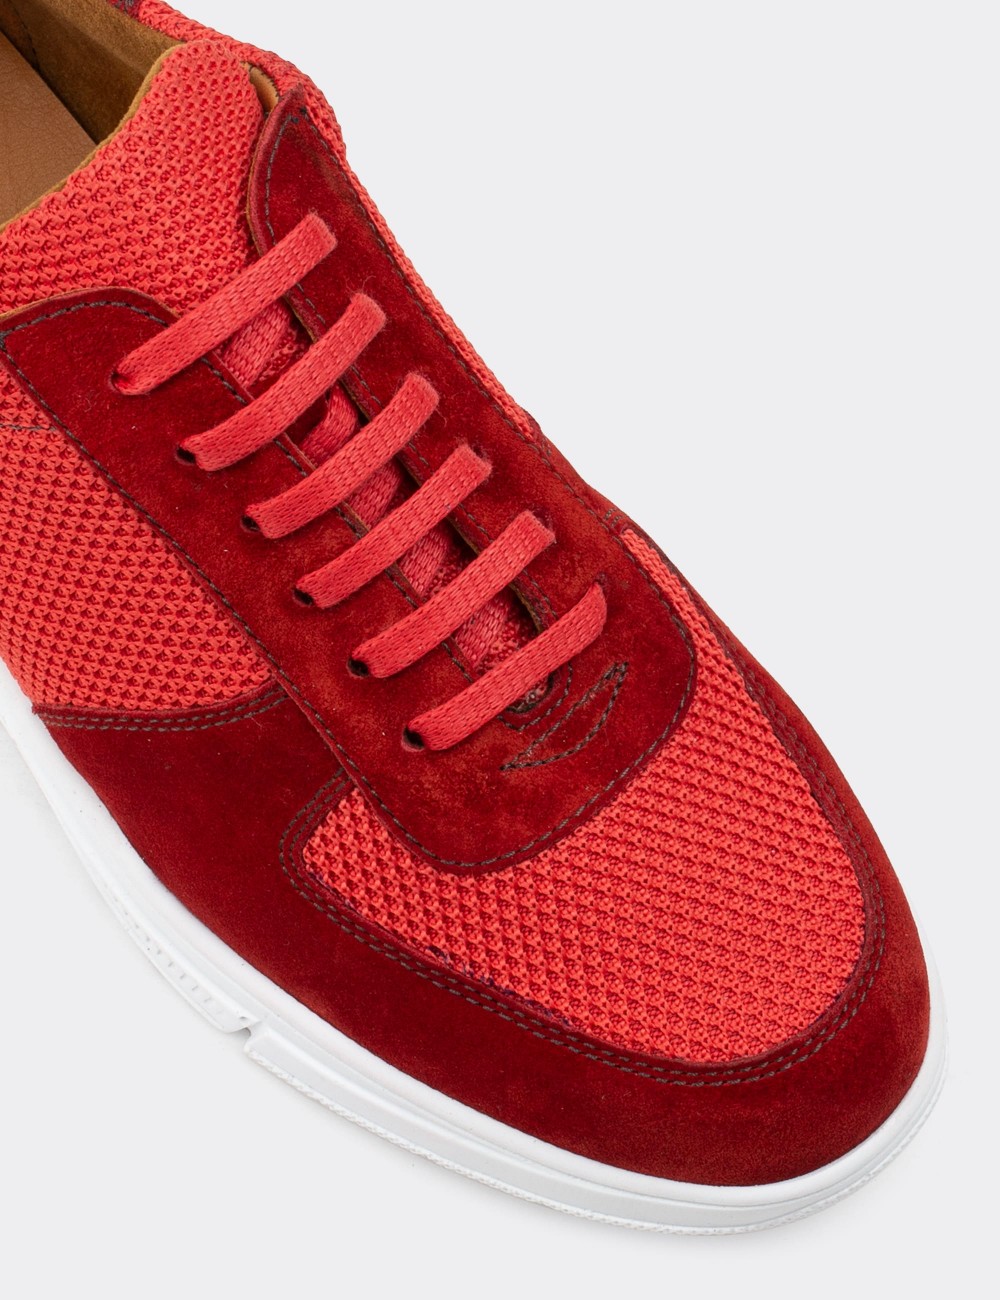 Red Suede Leather Sneakers - 01860MKRMC01